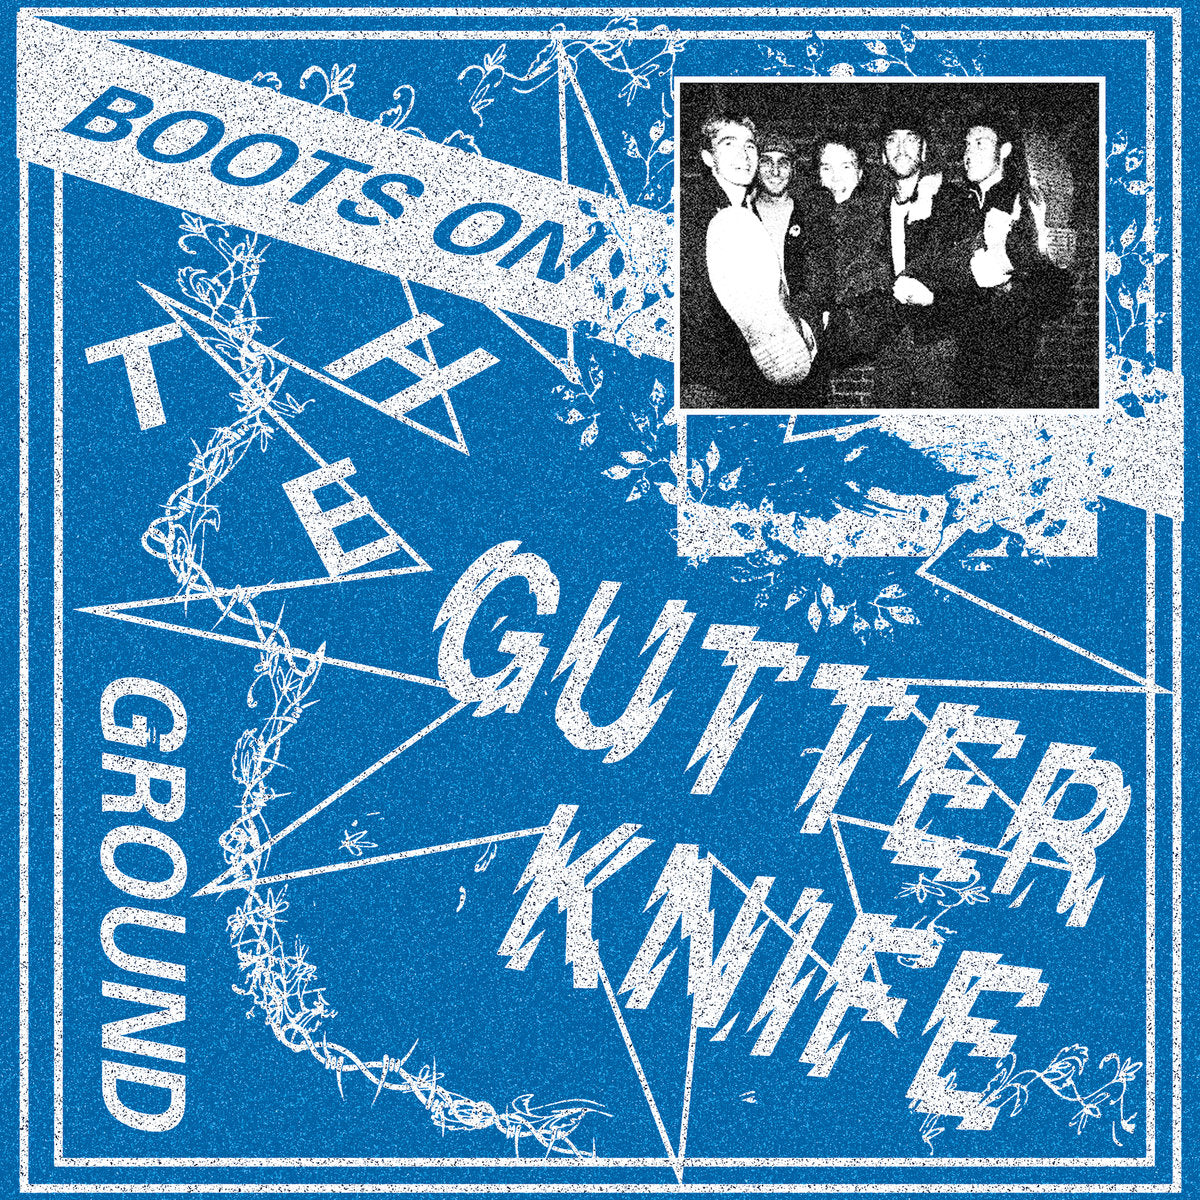 GUTTER KNIFE 'Boots On The Ground' 12"